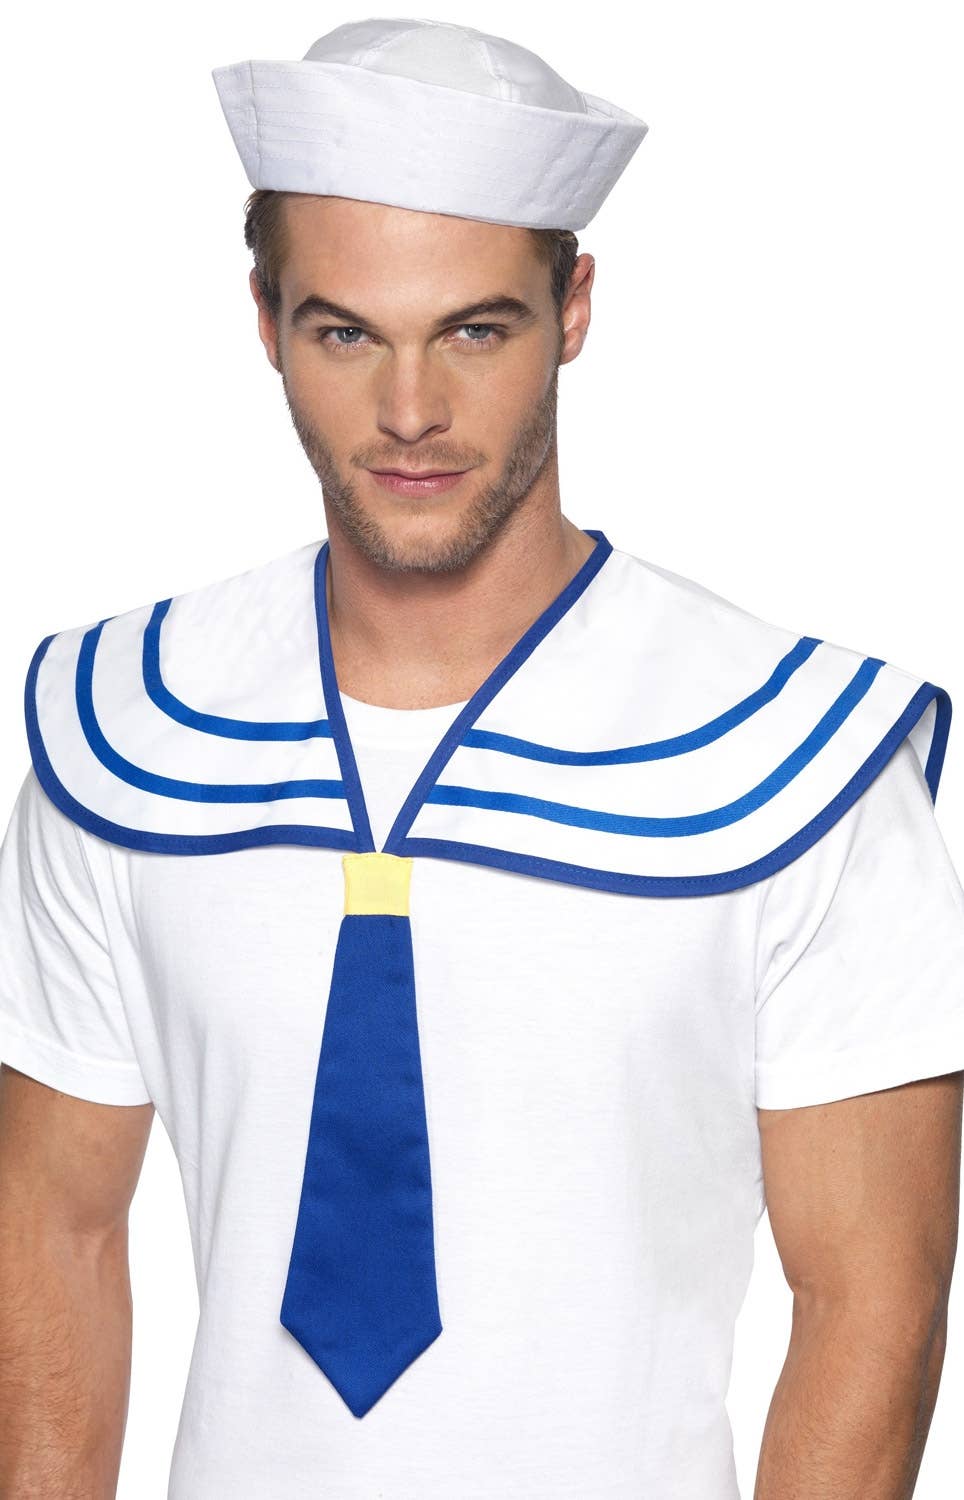 Blue and White Sailor Bib and Tie Costume Accessory Main Image